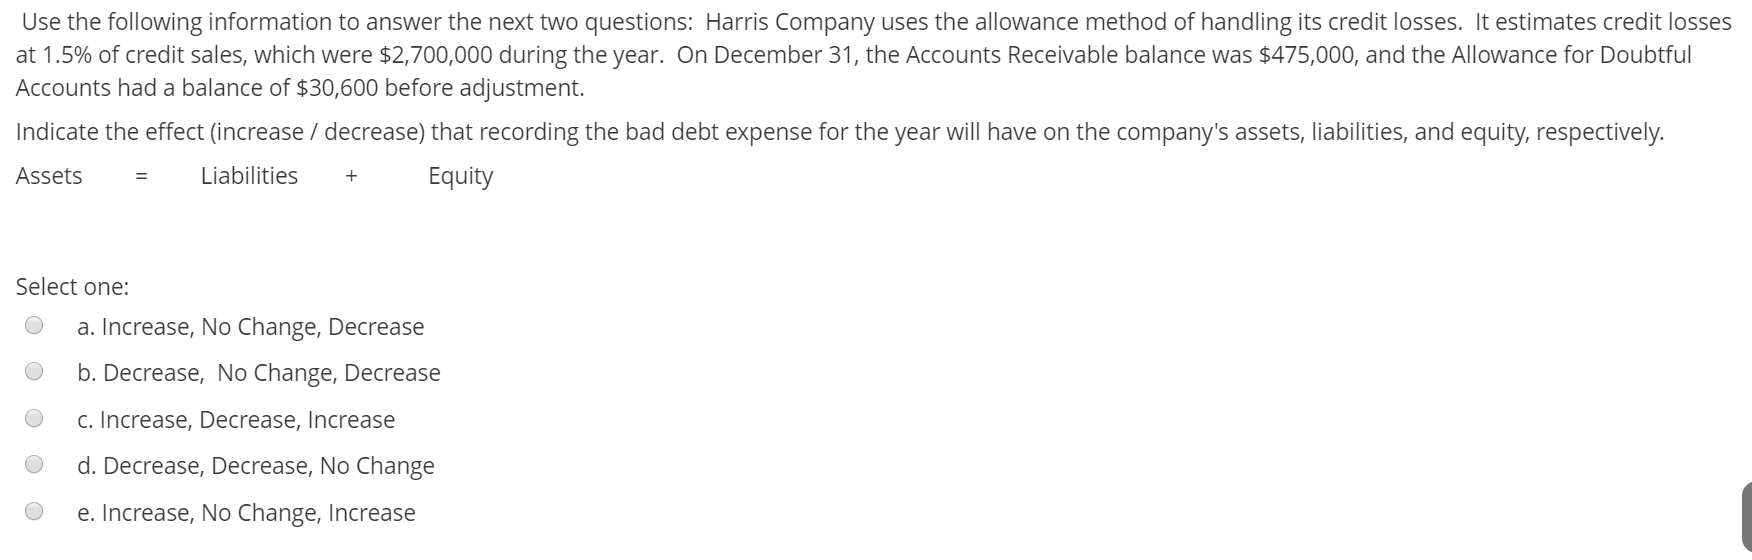 Use the following information to answer the next two questions: Harris Company uses the allowance method of handling its credit losses. It estimates credit losses
at 1.5% of credit sales, which were $2,700,000 during the year. On December 31, the Accounts Receivable balance was $475,000, and the Allowance for Doubtful
Accounts had a balance of $30,600 before adjustment.
Indicate the effect (increase / decrease) that recording the bad debt expense for the year will have on the company's assets, liabilities, and equity, respectively.
Assets
Liabilities
Equity
Select one:
a. Increase, No Change, Decrease
b. Decrease, No Change, Decrease
c. Increase, Decrease, Increase
d. Decrease, Decrease, No Change
e. Increase, No Change, Increase
